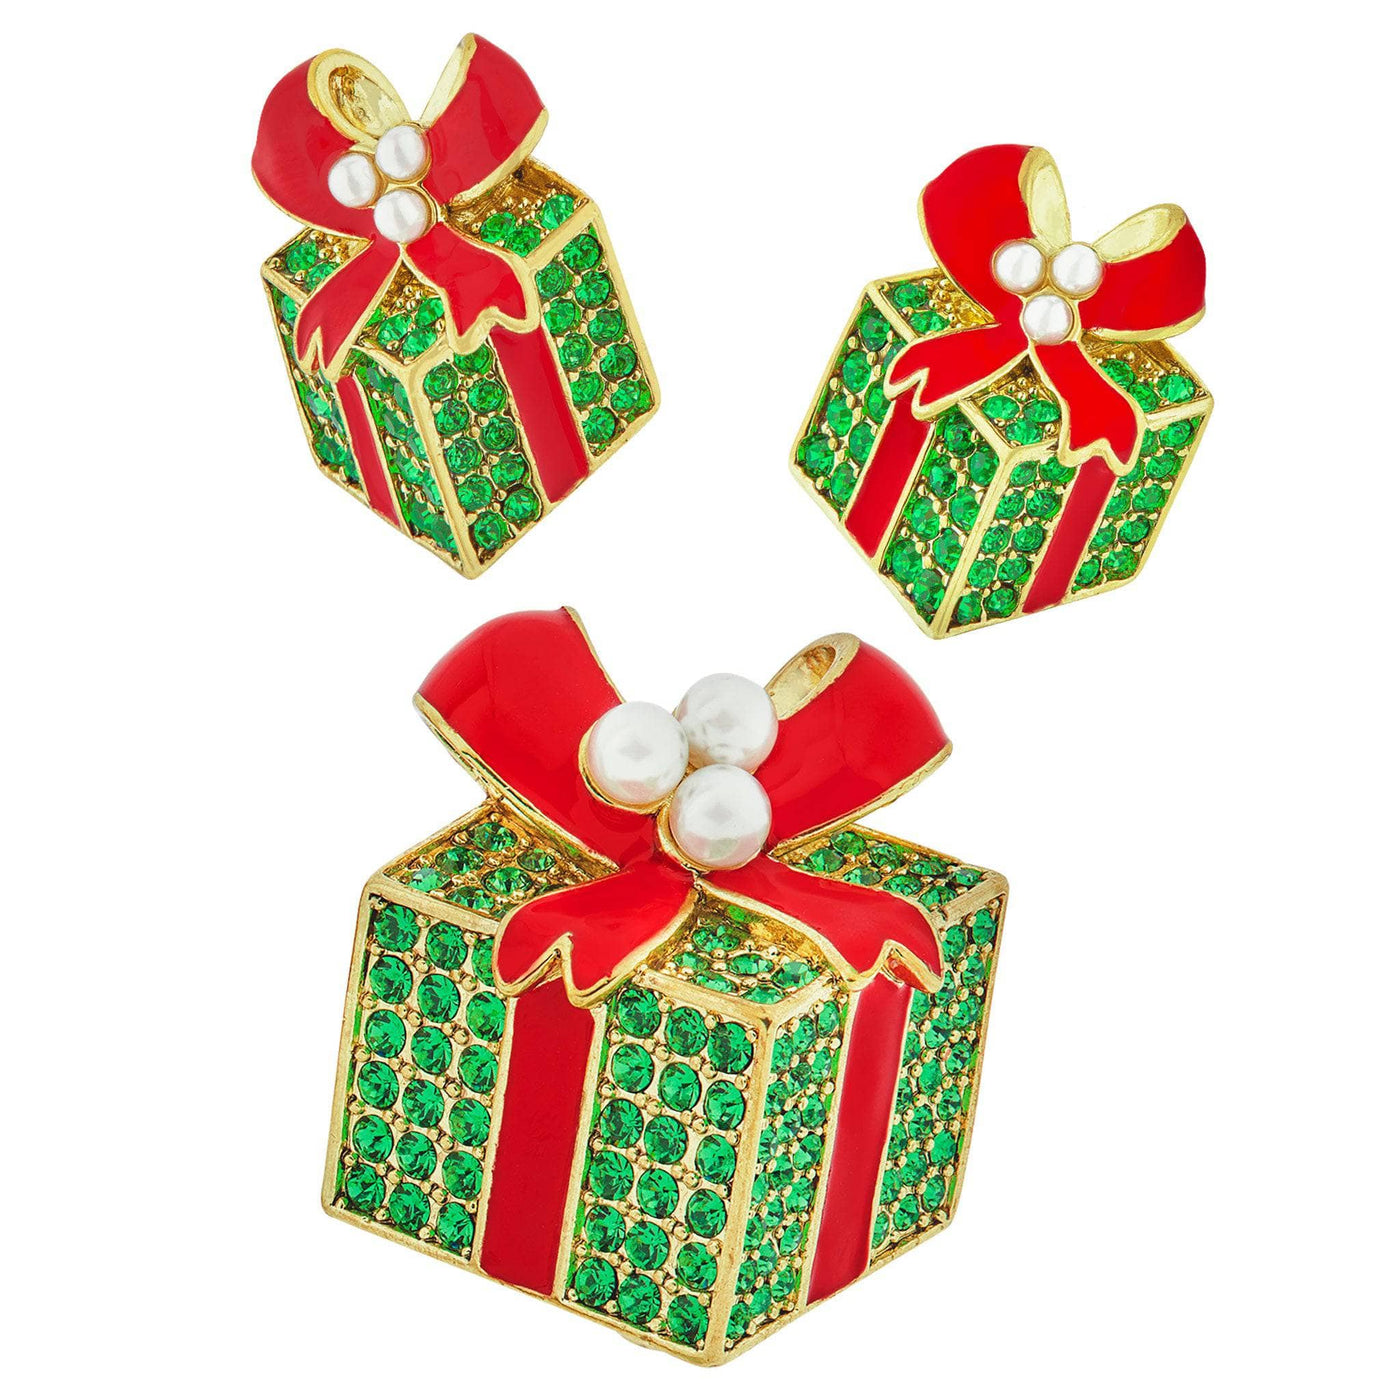 HEIDI DAUS®"Today Is a Gift" Enamel Beaded Crystal Gift Box Pin and Earrings Set